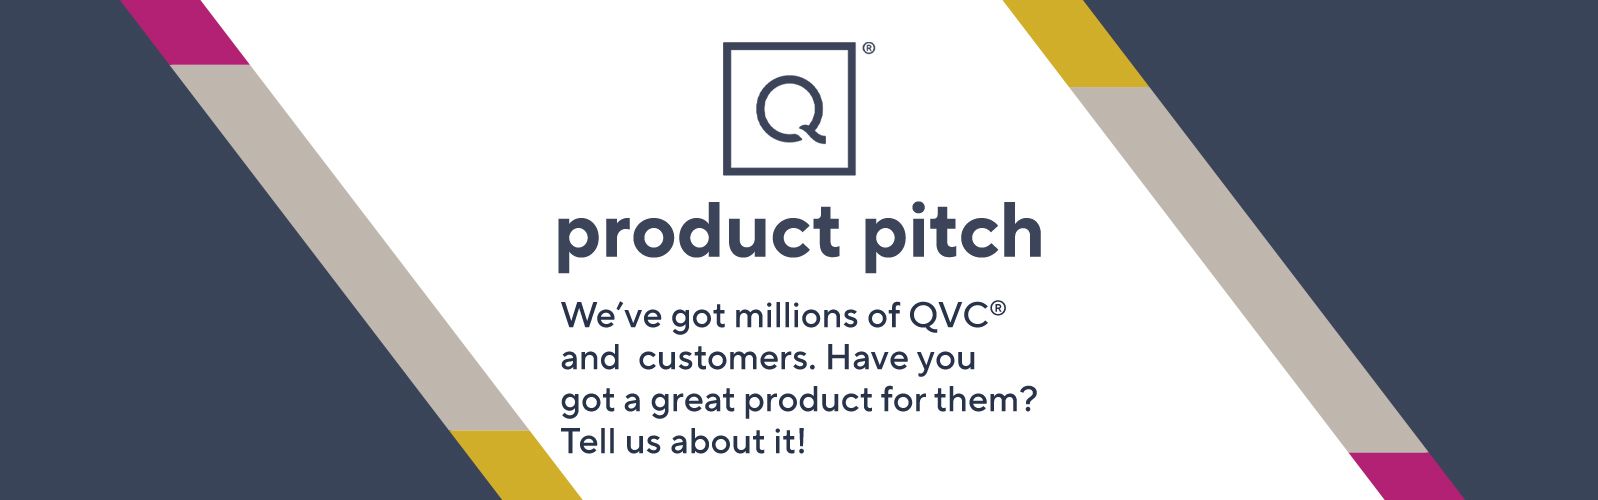 We've got millions of QVC® customers. Have you got a great product for them? Tell us about it!